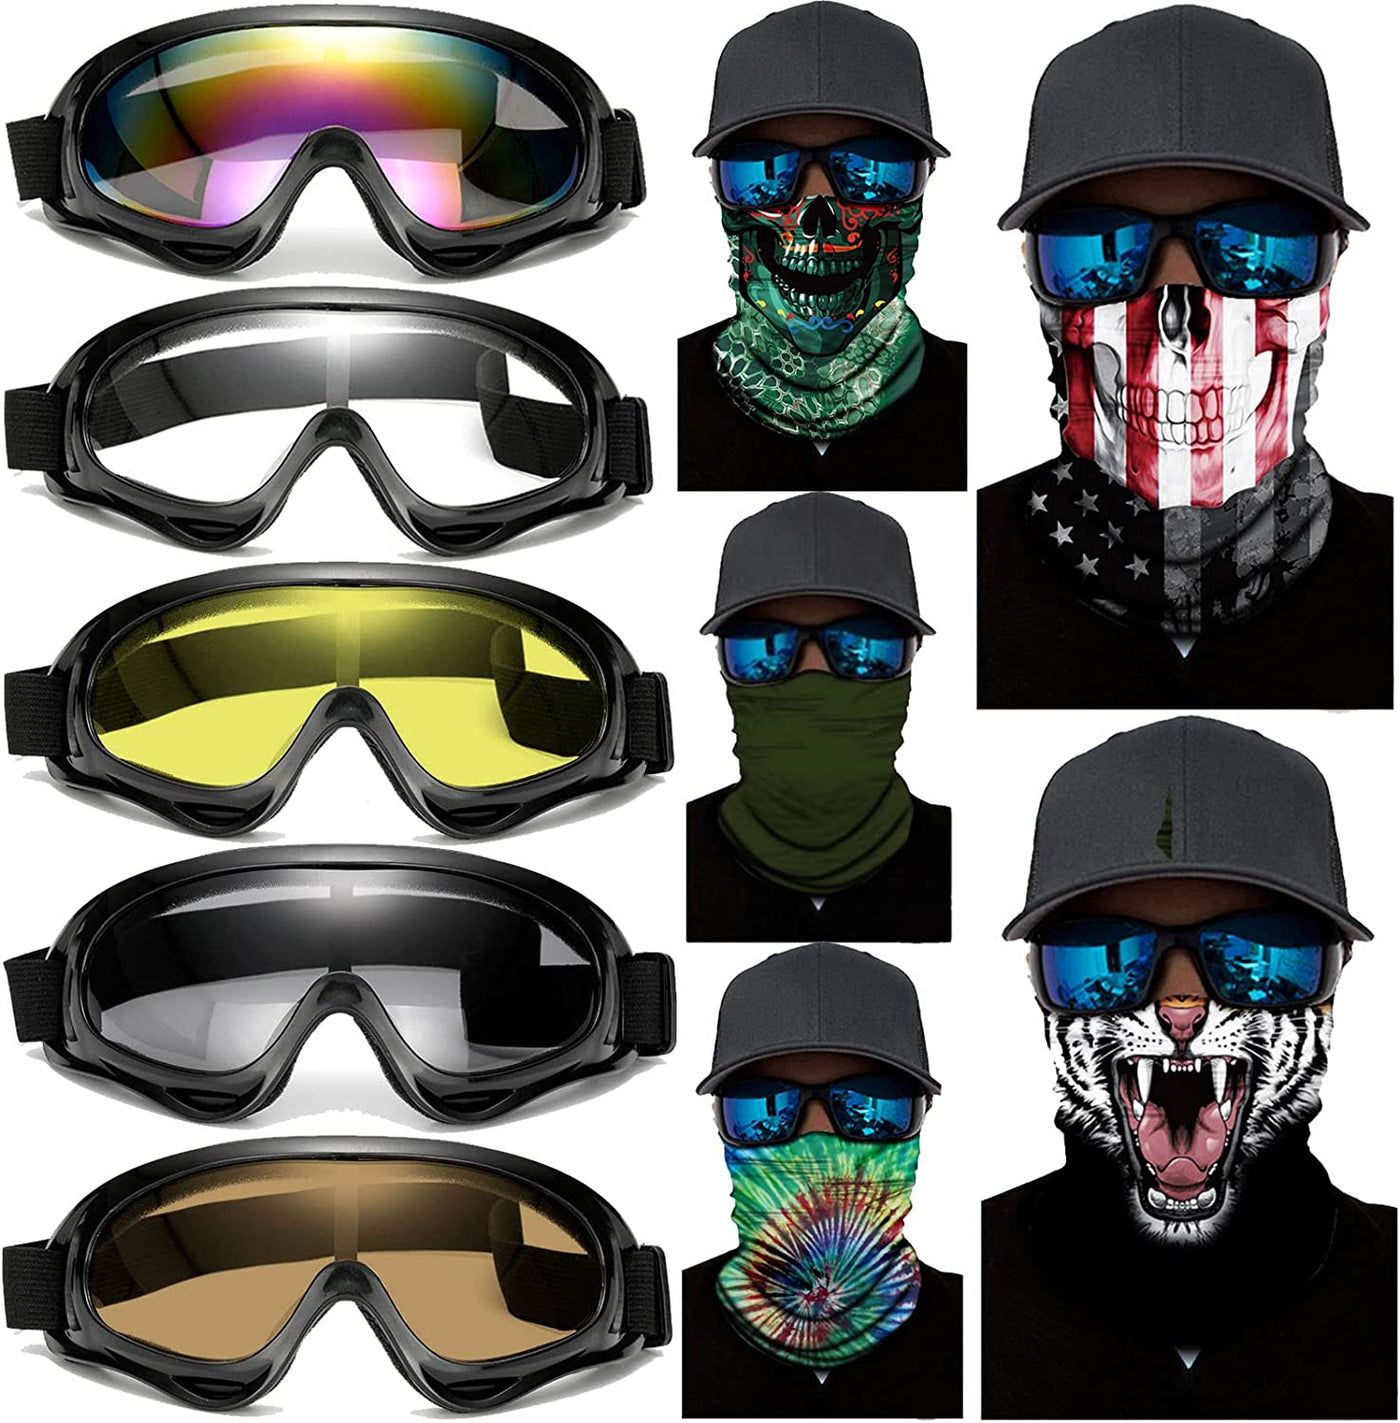  10 Packs Motorcycle Accessories, 5PCS Dirt Bike Ski Goggles Dustproof Windproof Safety Glasses and 5PCS Face Masks